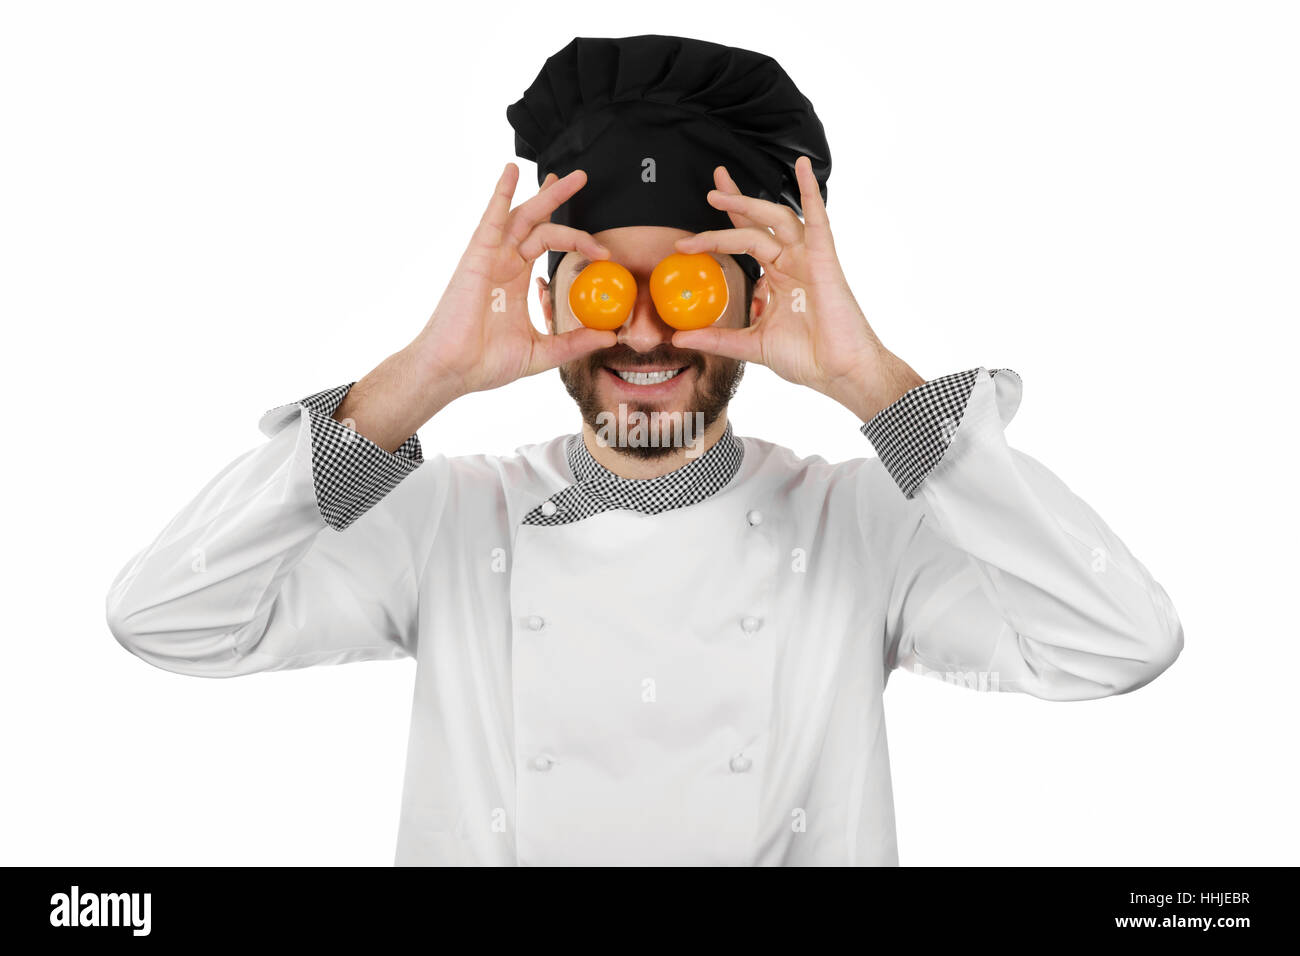 Happy chef couvrant ses yeux avec des tomates isolated on white Banque D'Images